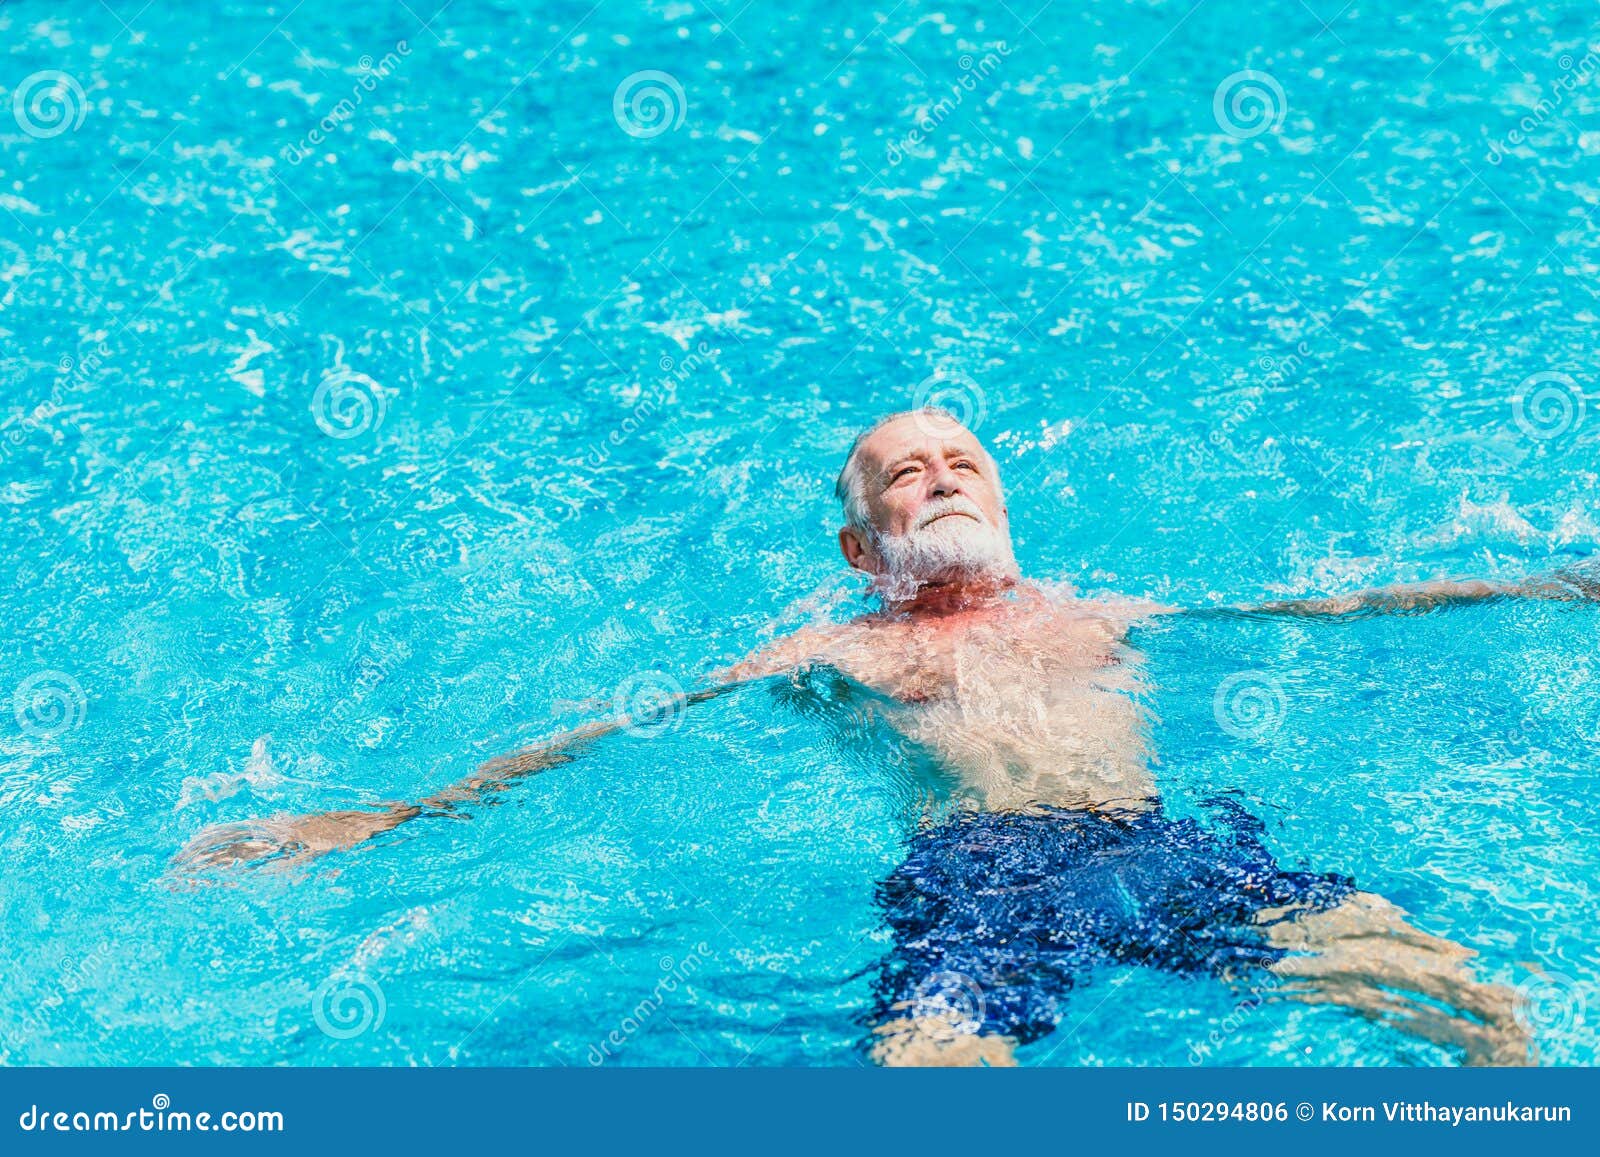 healthy elder enjoy relax swimming in the swimming pool alone vacation holiday